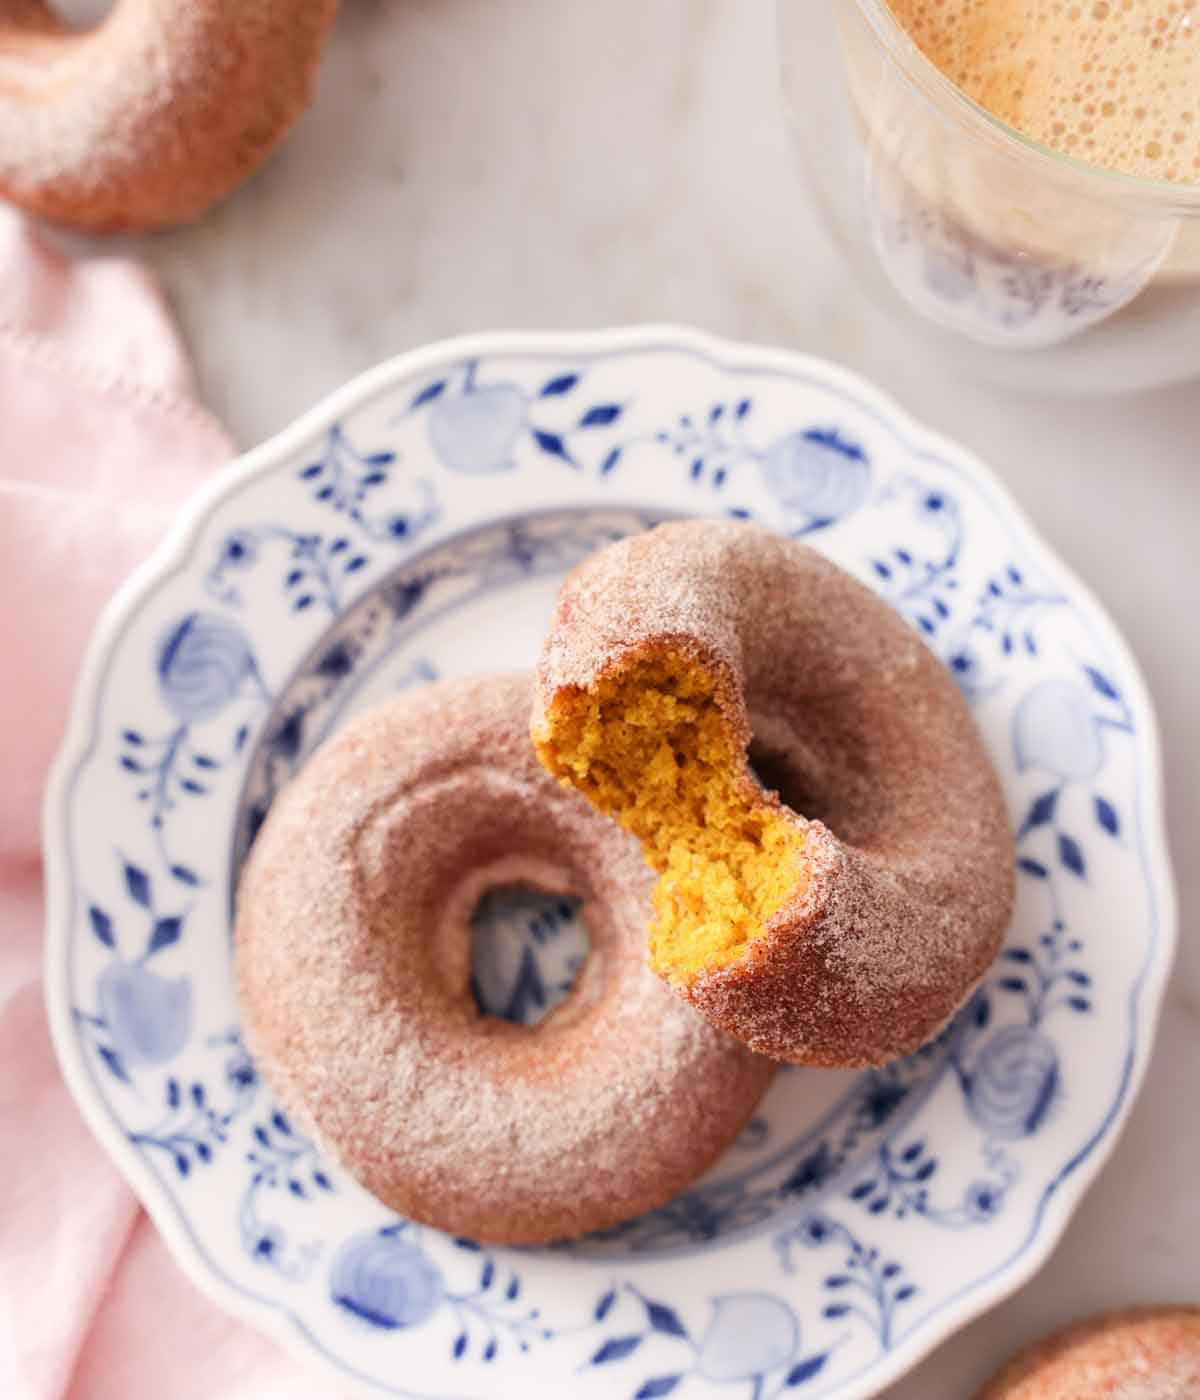 Overhead view of two pumpkin donuts with one propped on the other with a bite taken out of it.